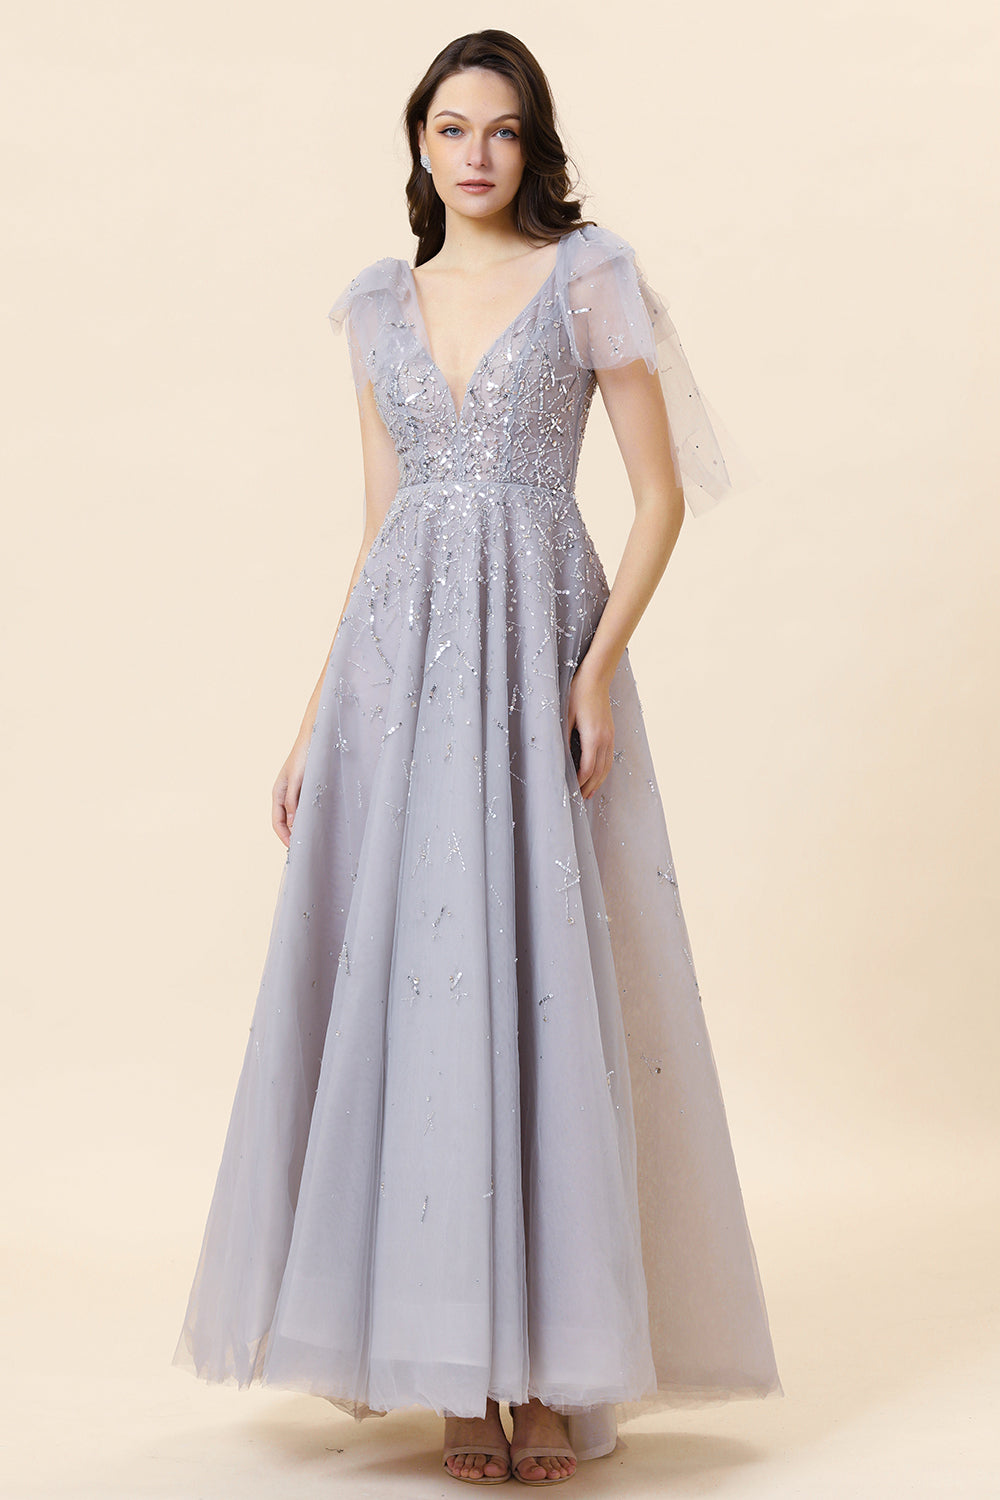 Sparkly Beaded Grey Long Tulle Prom Dress